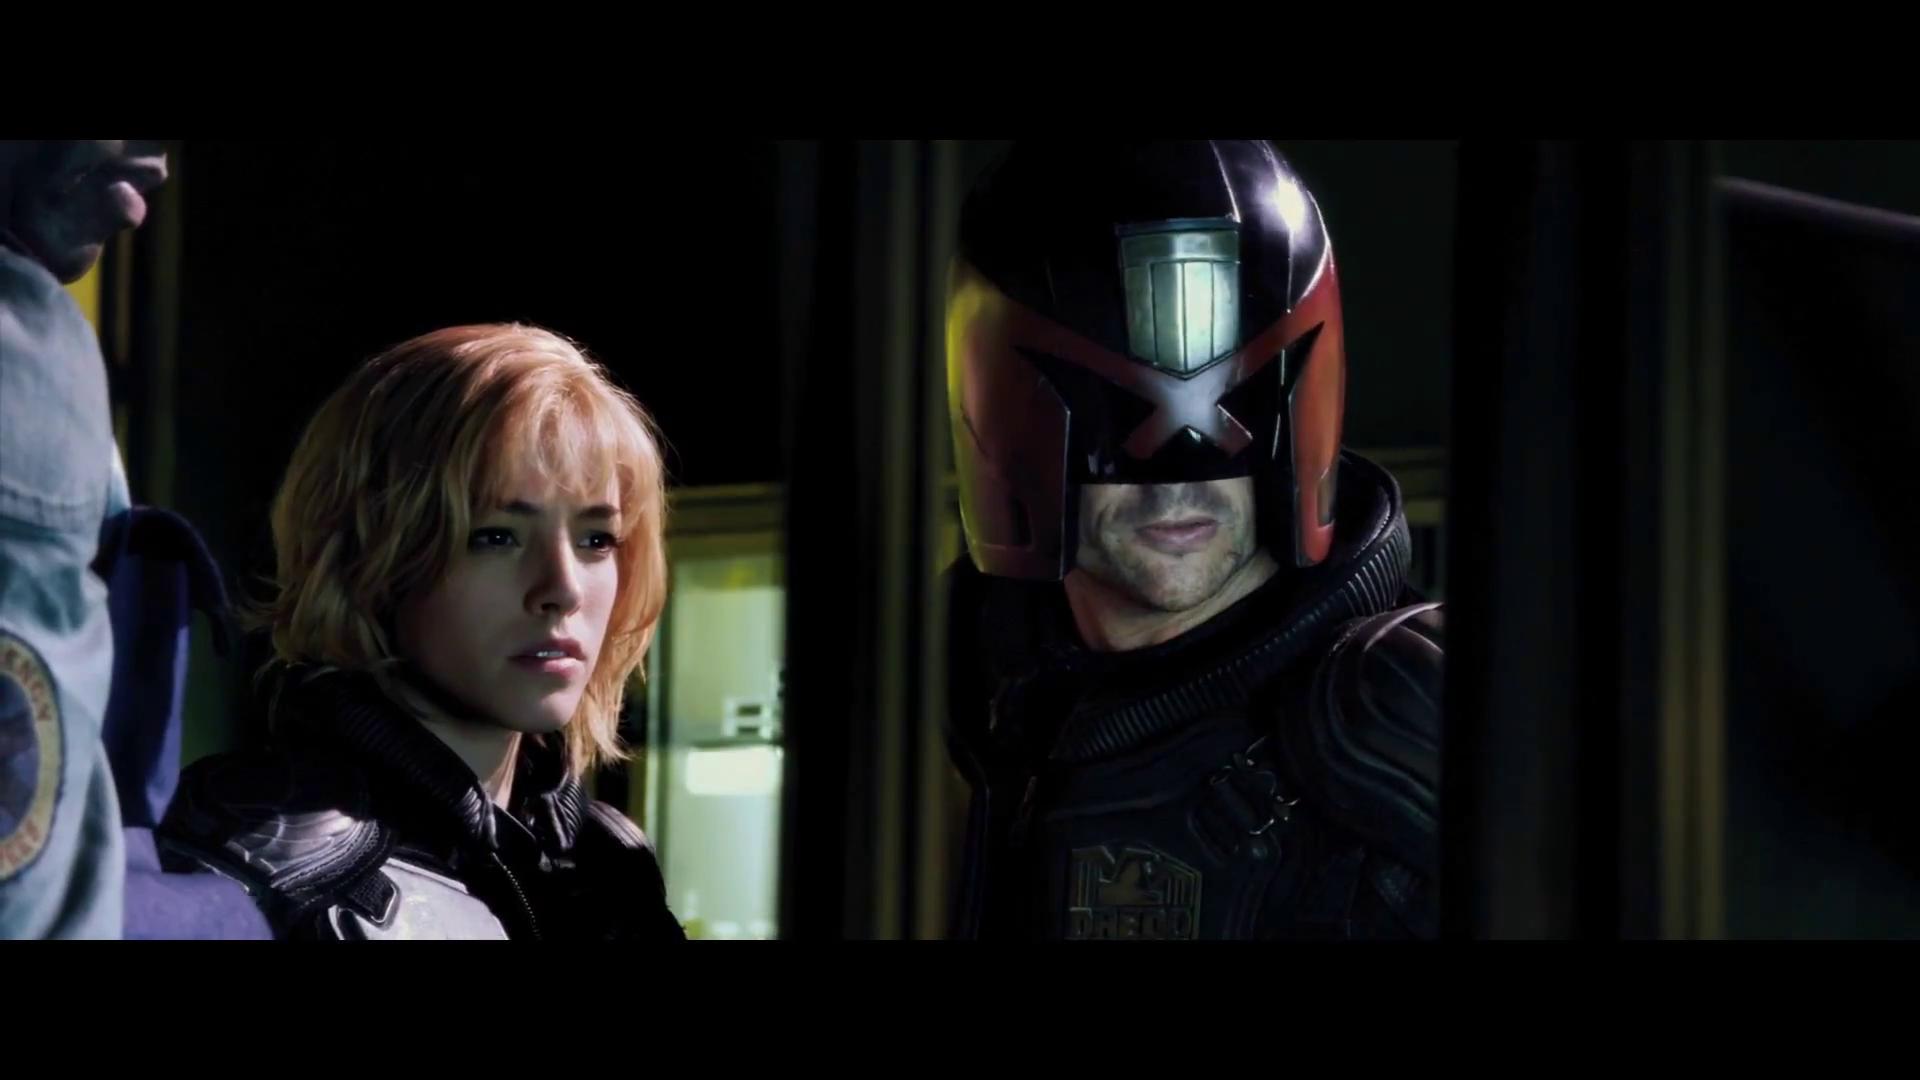 Dredd free wallpaper in high quality Dresd movie background